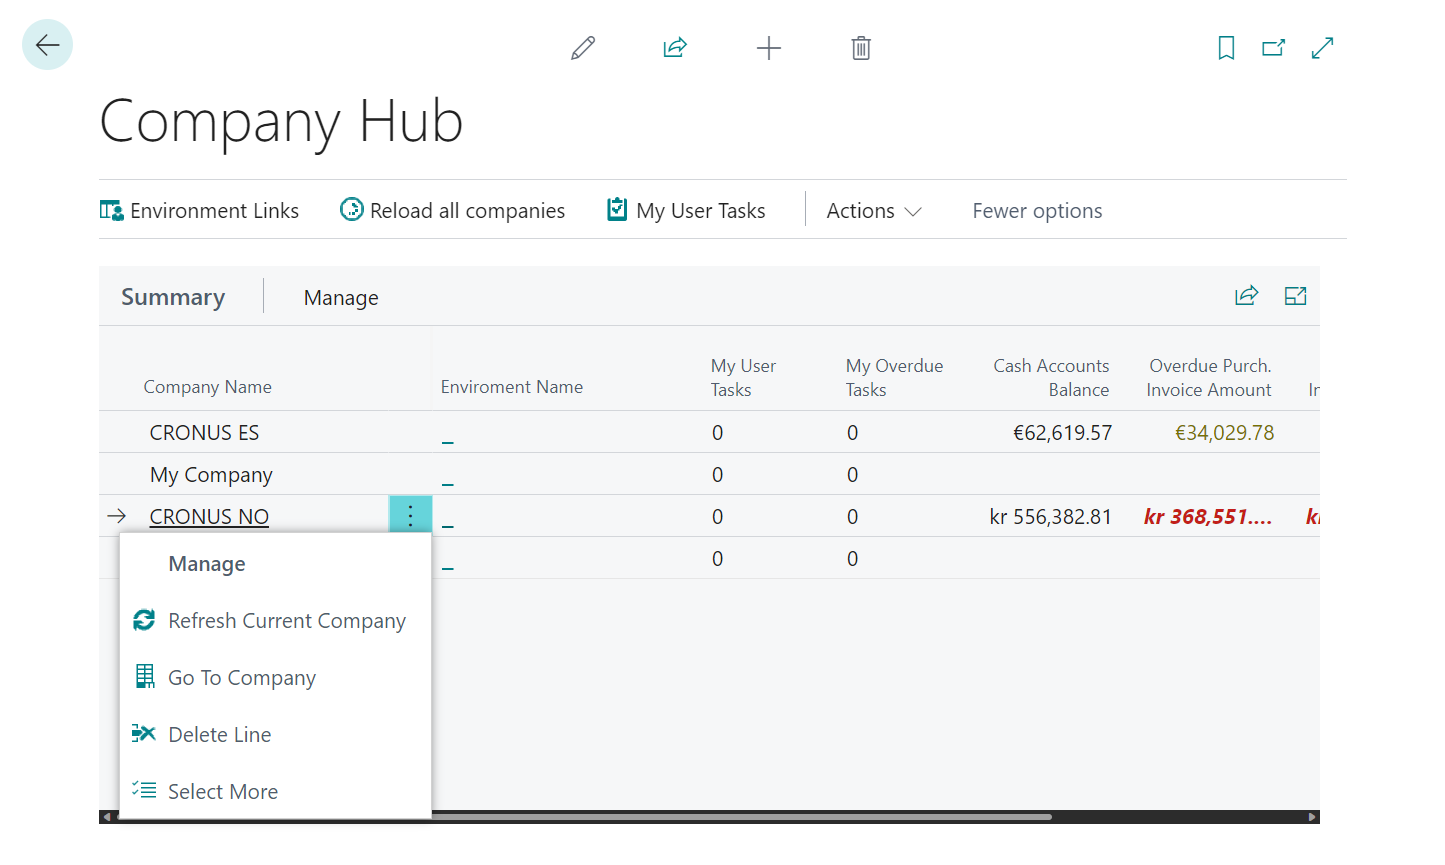 Manage Work across Multiple Companies in the Company Hub - Business Central  | Microsoft Docs